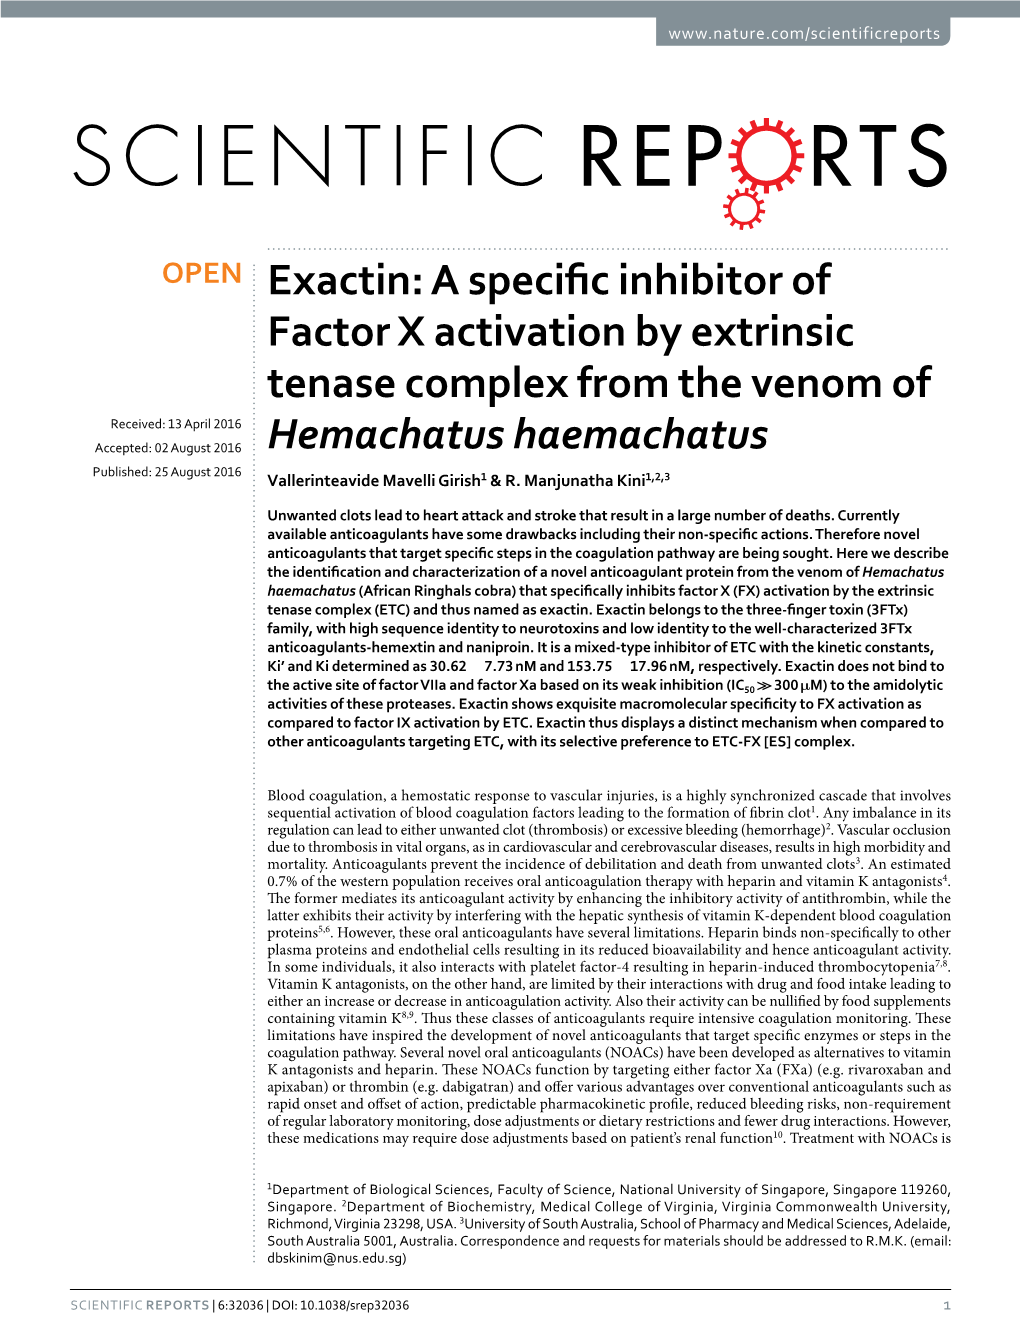 Exactin: a Specific Inhibitor of Factor X Activation by Extrinsic Tenase